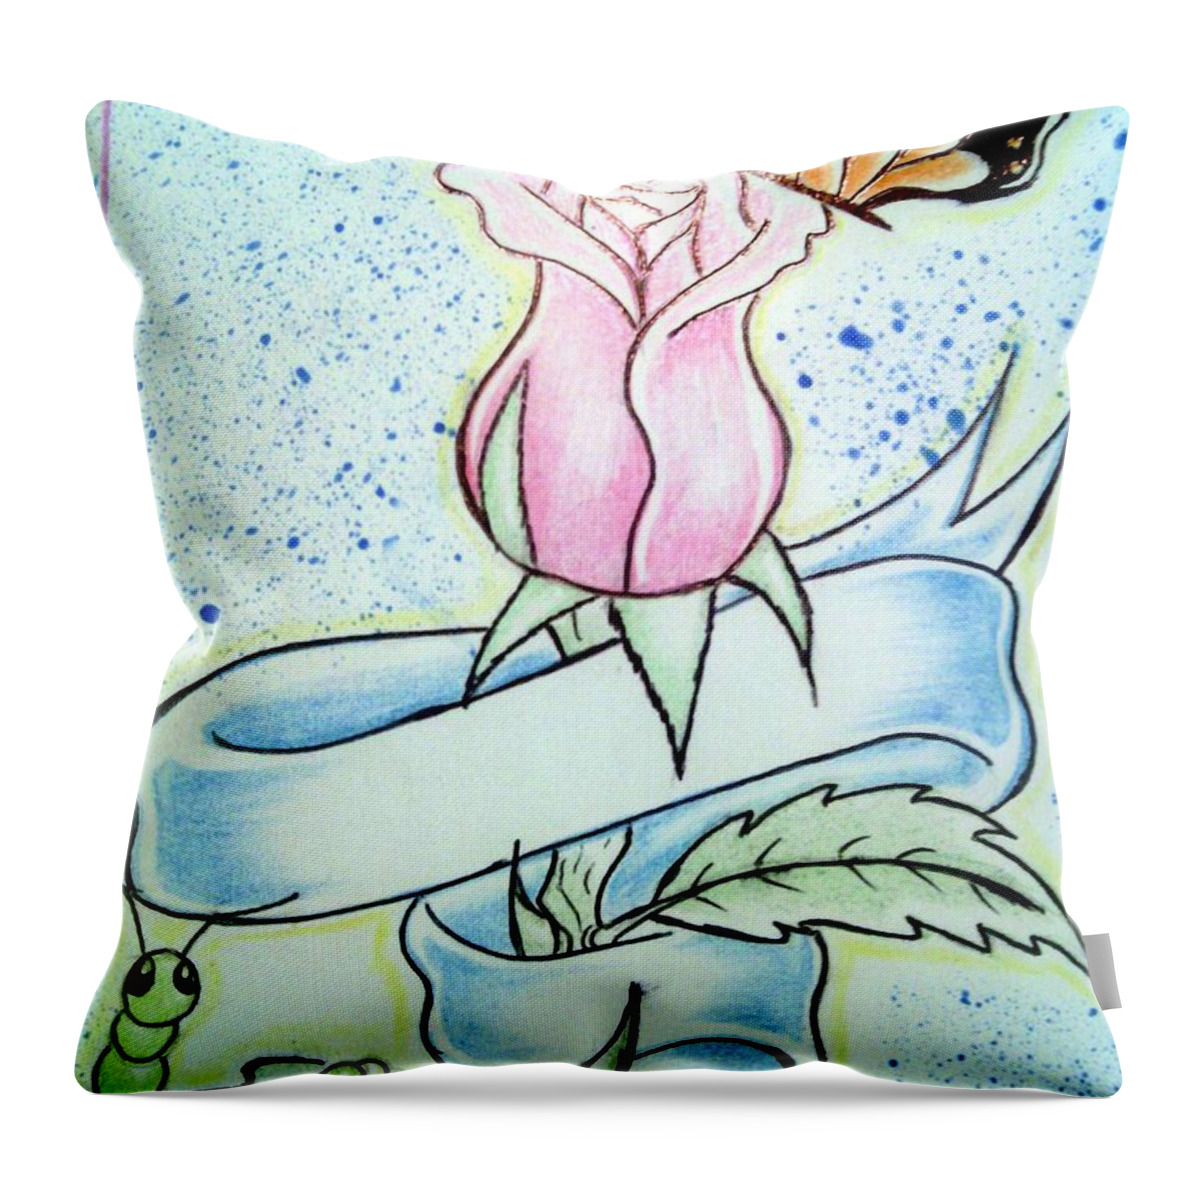 Prison Art Throw Pillow featuring the drawing Untitled 2 by Unknown 